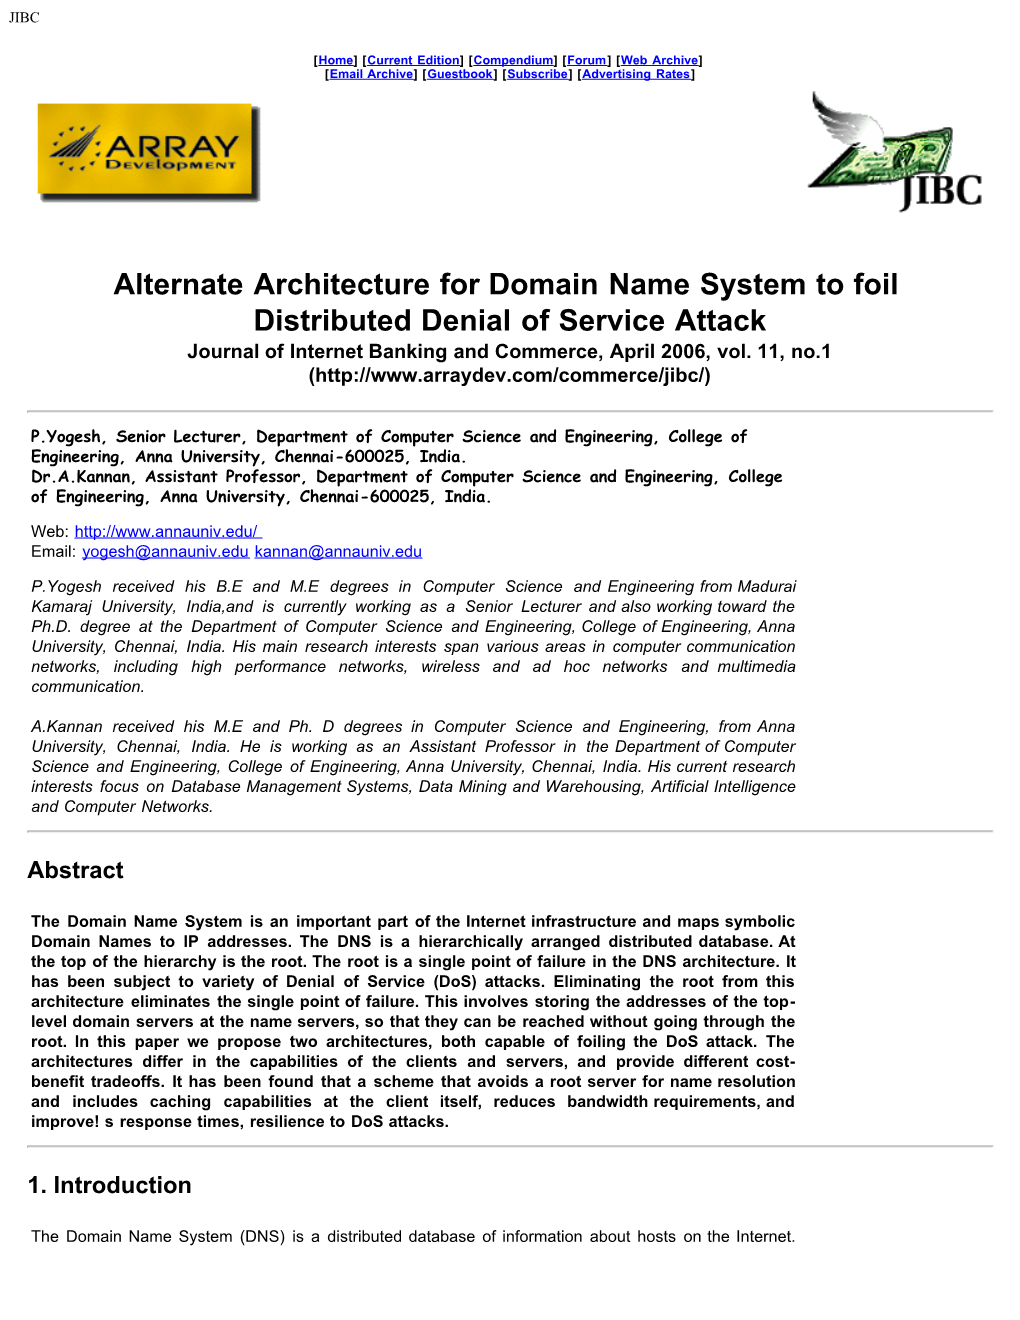 Alternate Architecture for Domain Name System to Foil Distributed Denial of Service Attack Journal of Internet Banking and Commerce, April 2006, Vol